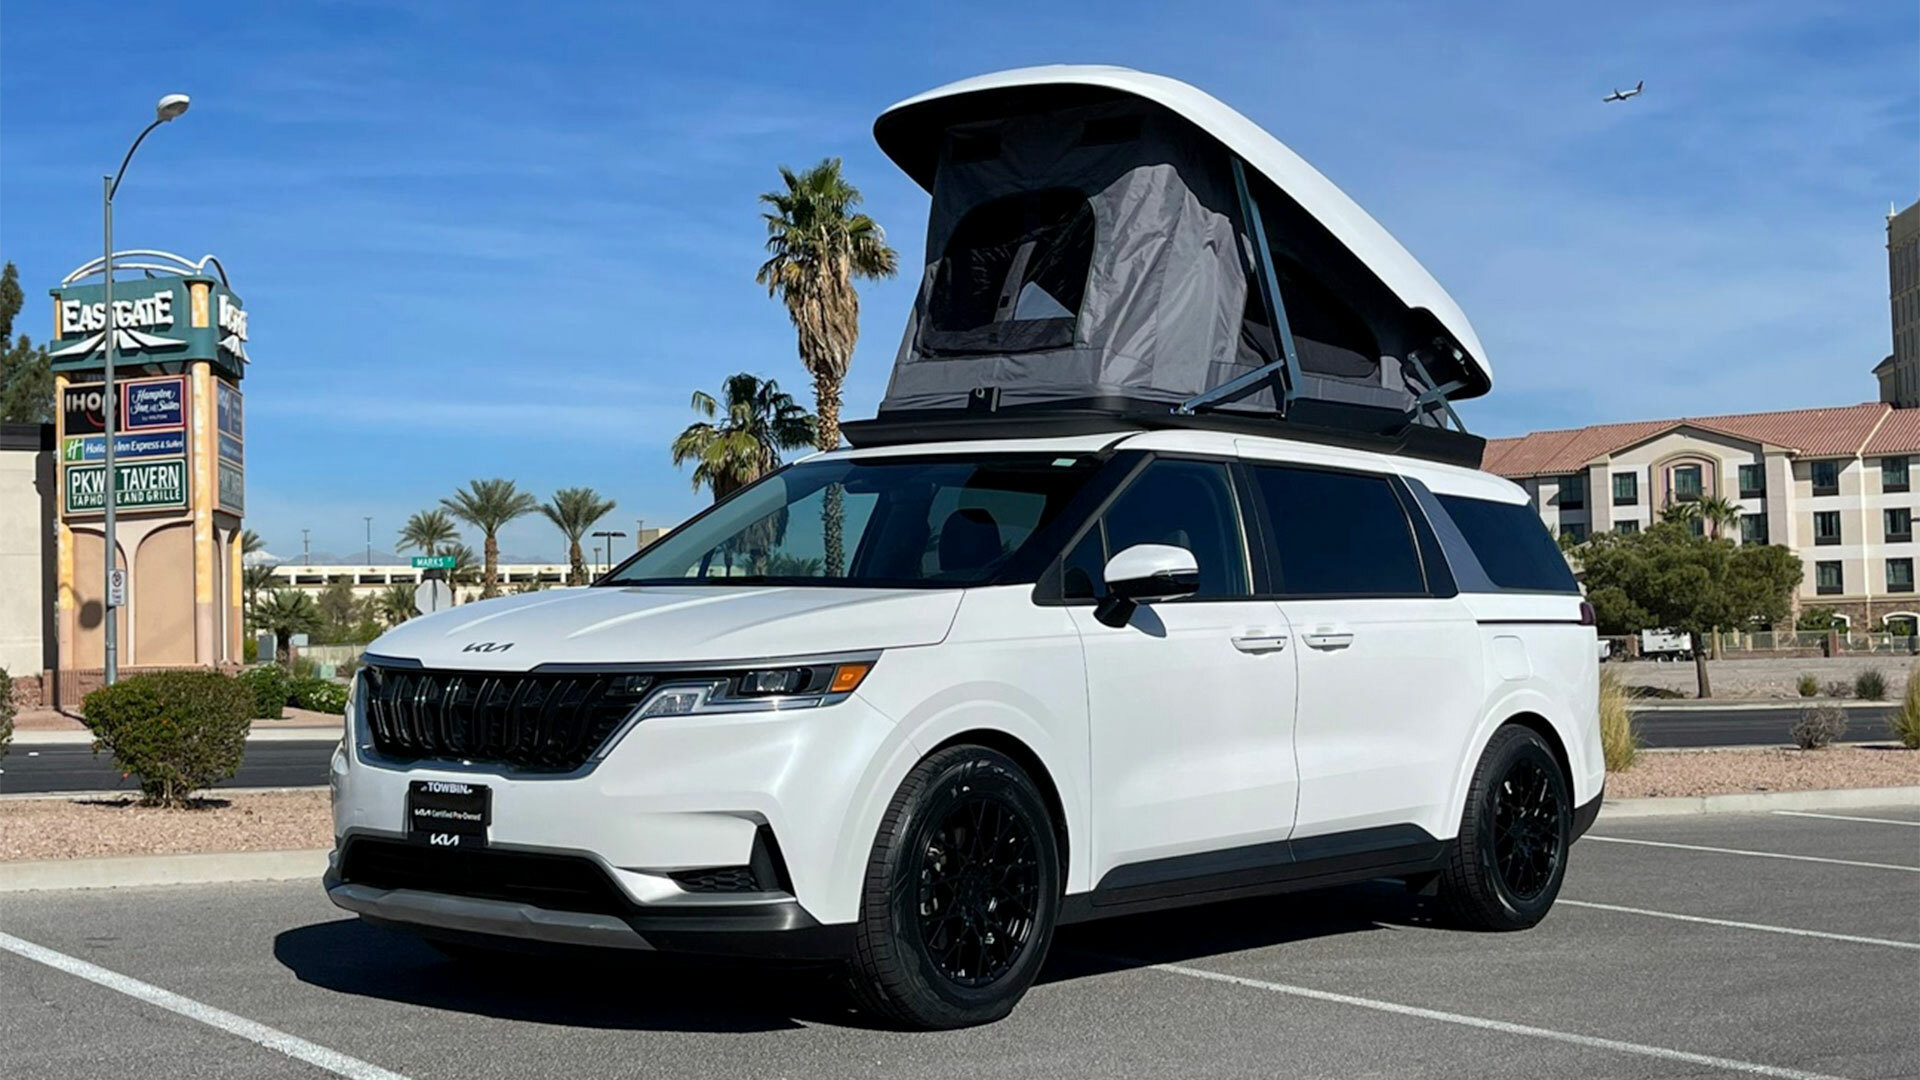 Turn Your Kia Carnival Into A Luxury Camper With UniCamp's $16,000 Pop Top  Bed